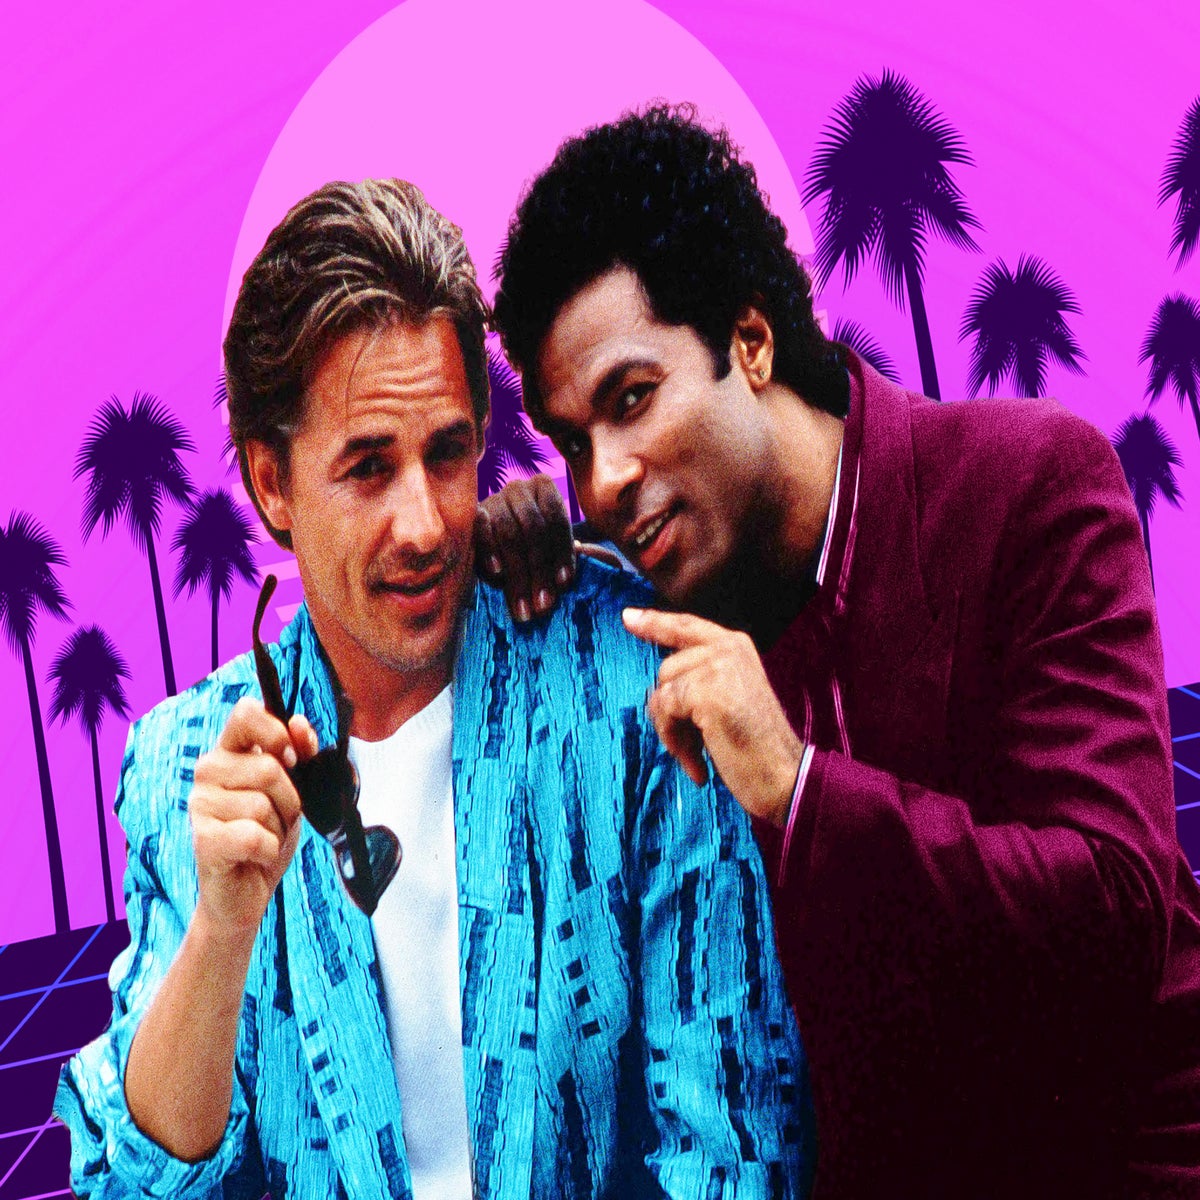 Miami Vice' Cast: What Are Don Johnson and His Costars Up to Now?